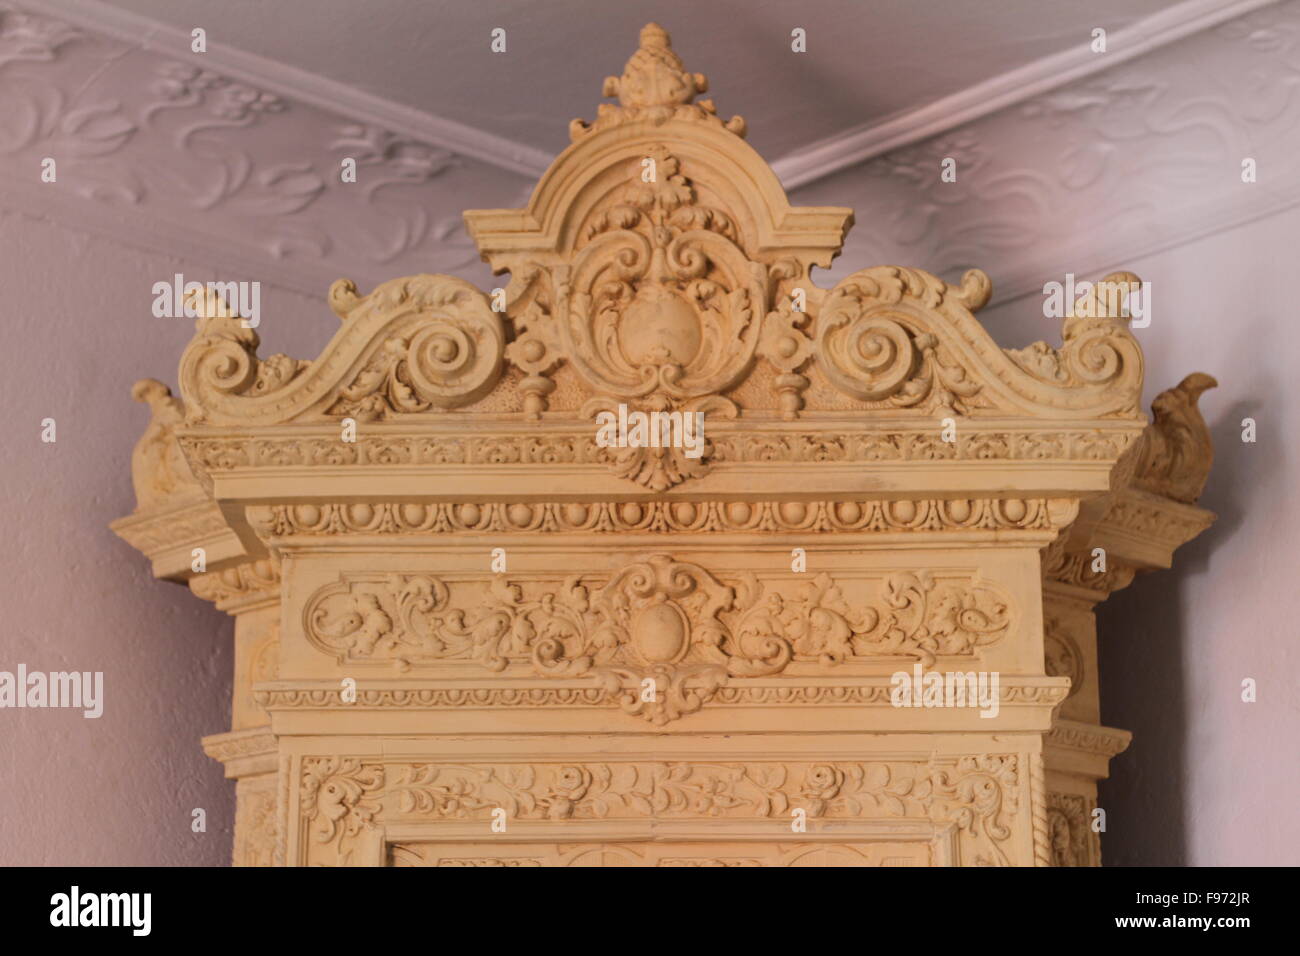 Highly Decorative Piece Of Furniture Stock Photo